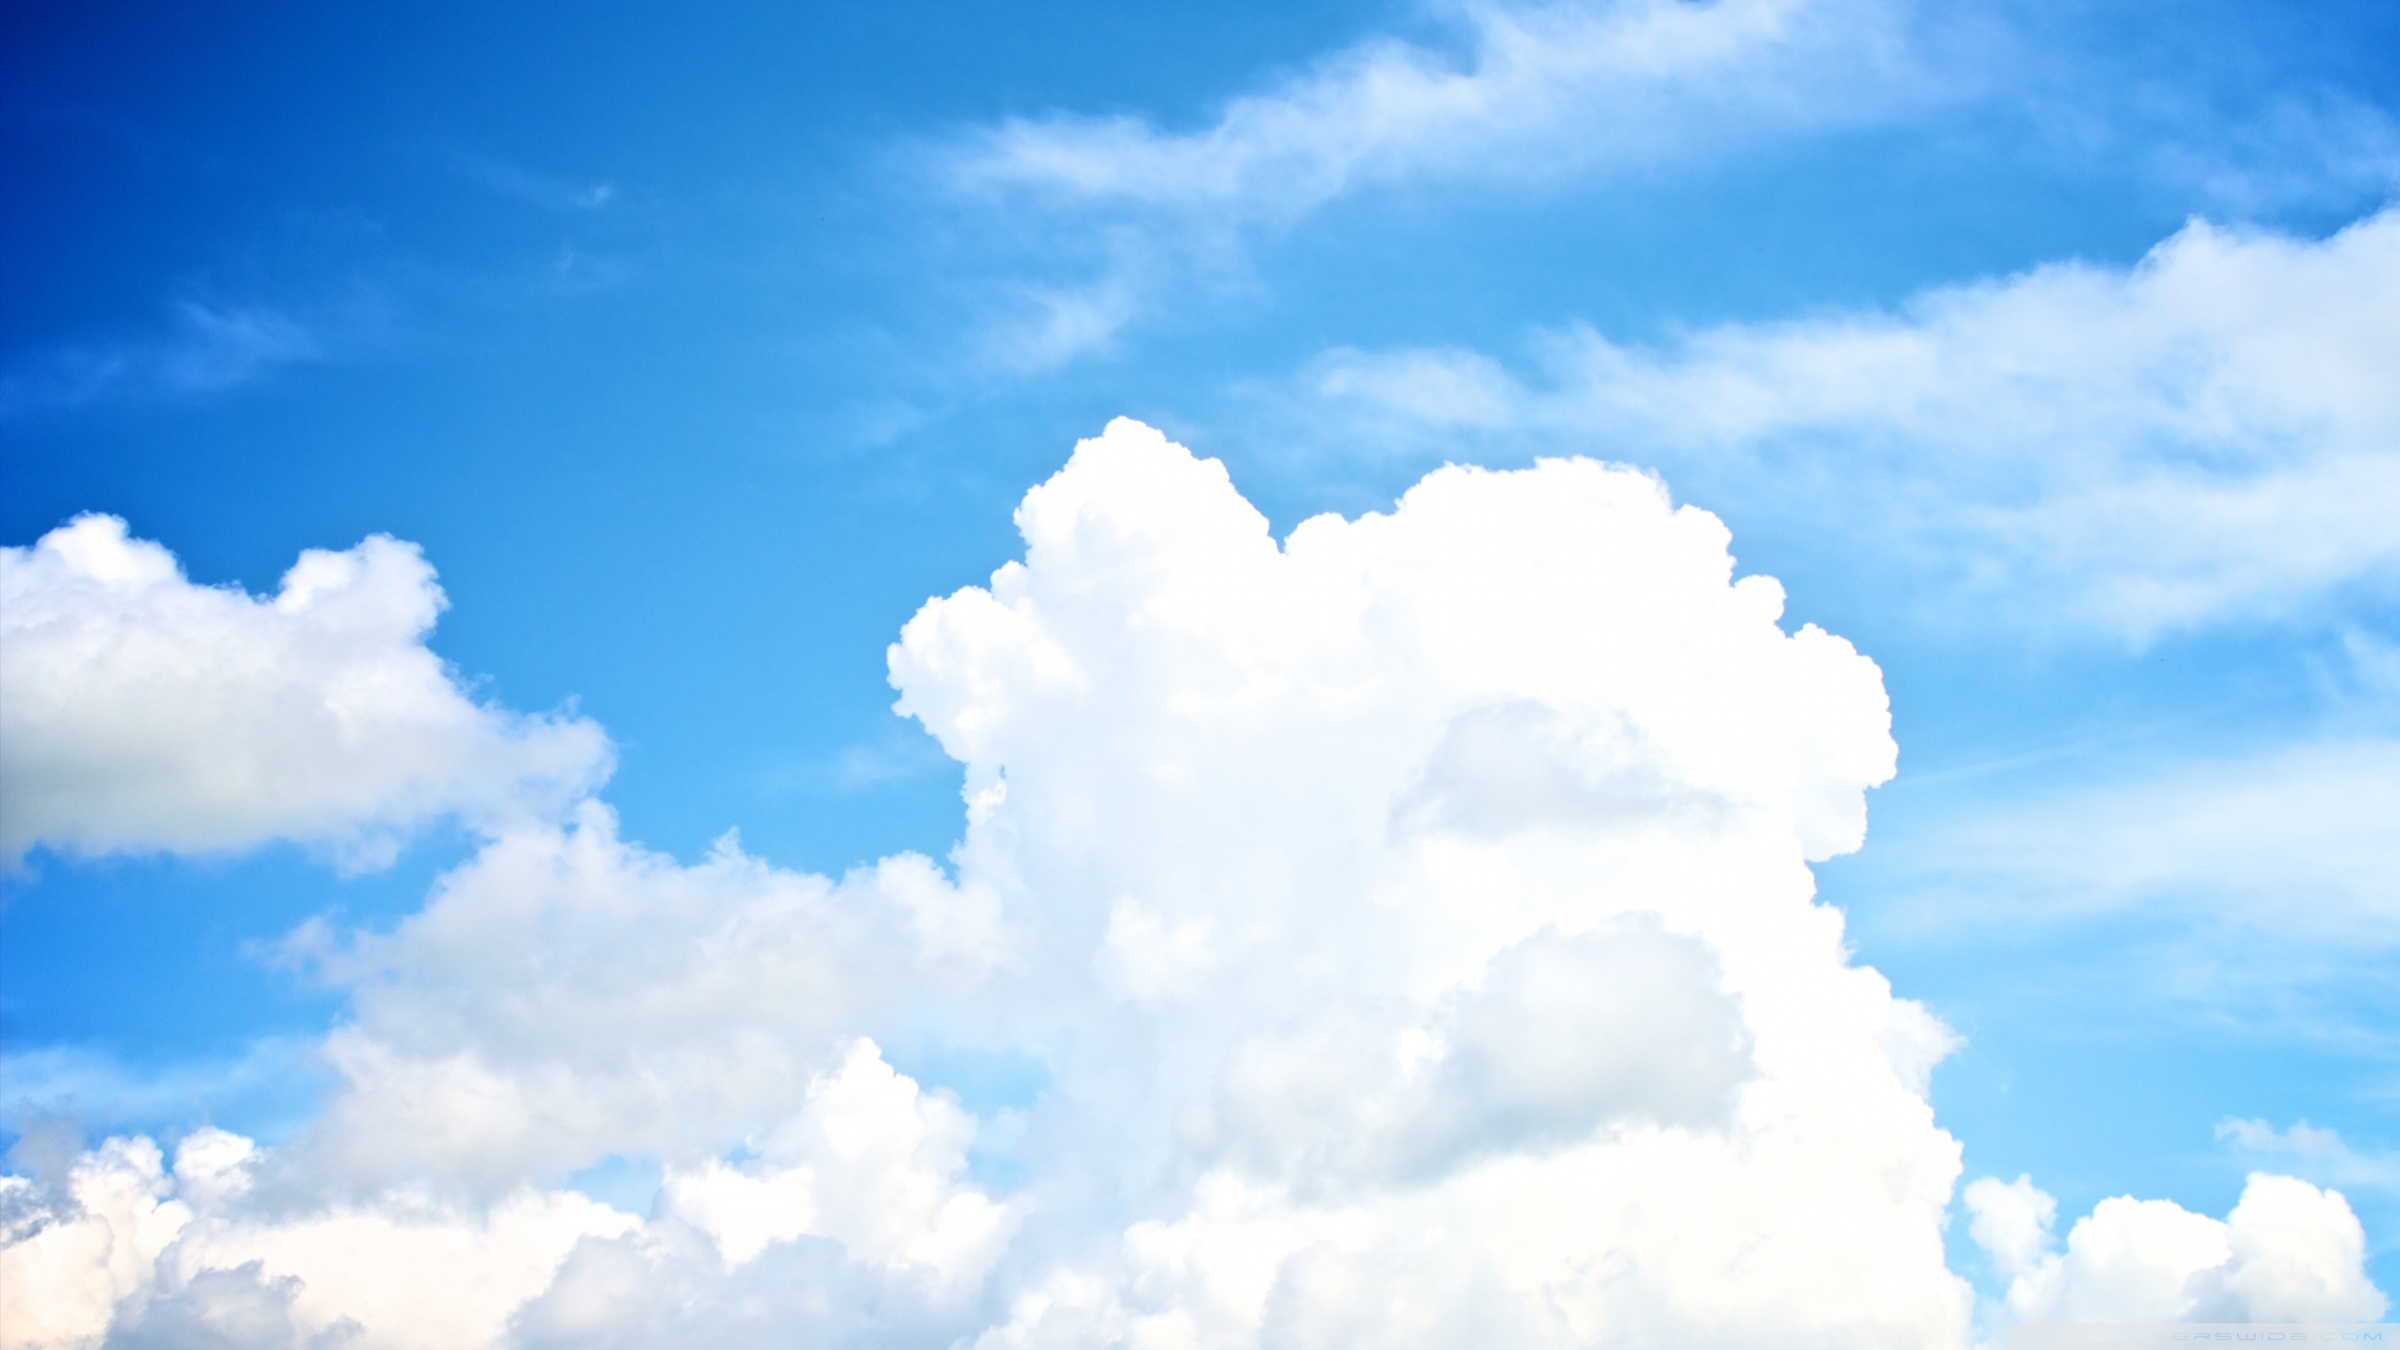 White Clouds In The Sky Ultra HD Desktop Background Wallpaper for 4K UHD TV  : Tablet : Smartphone